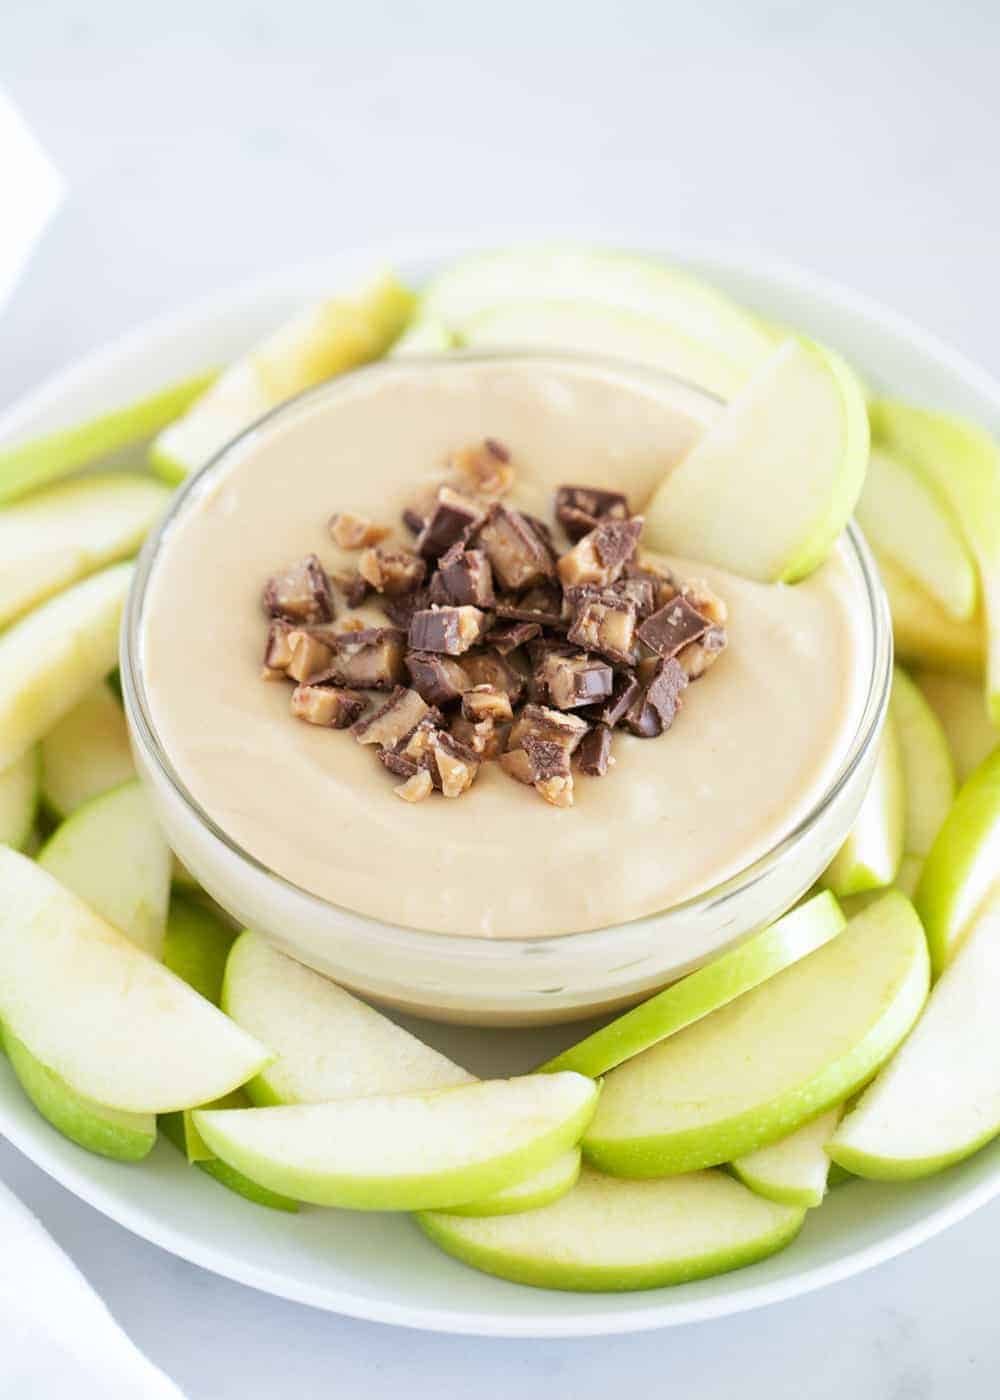 sliced green apples and toffee caramel dip 